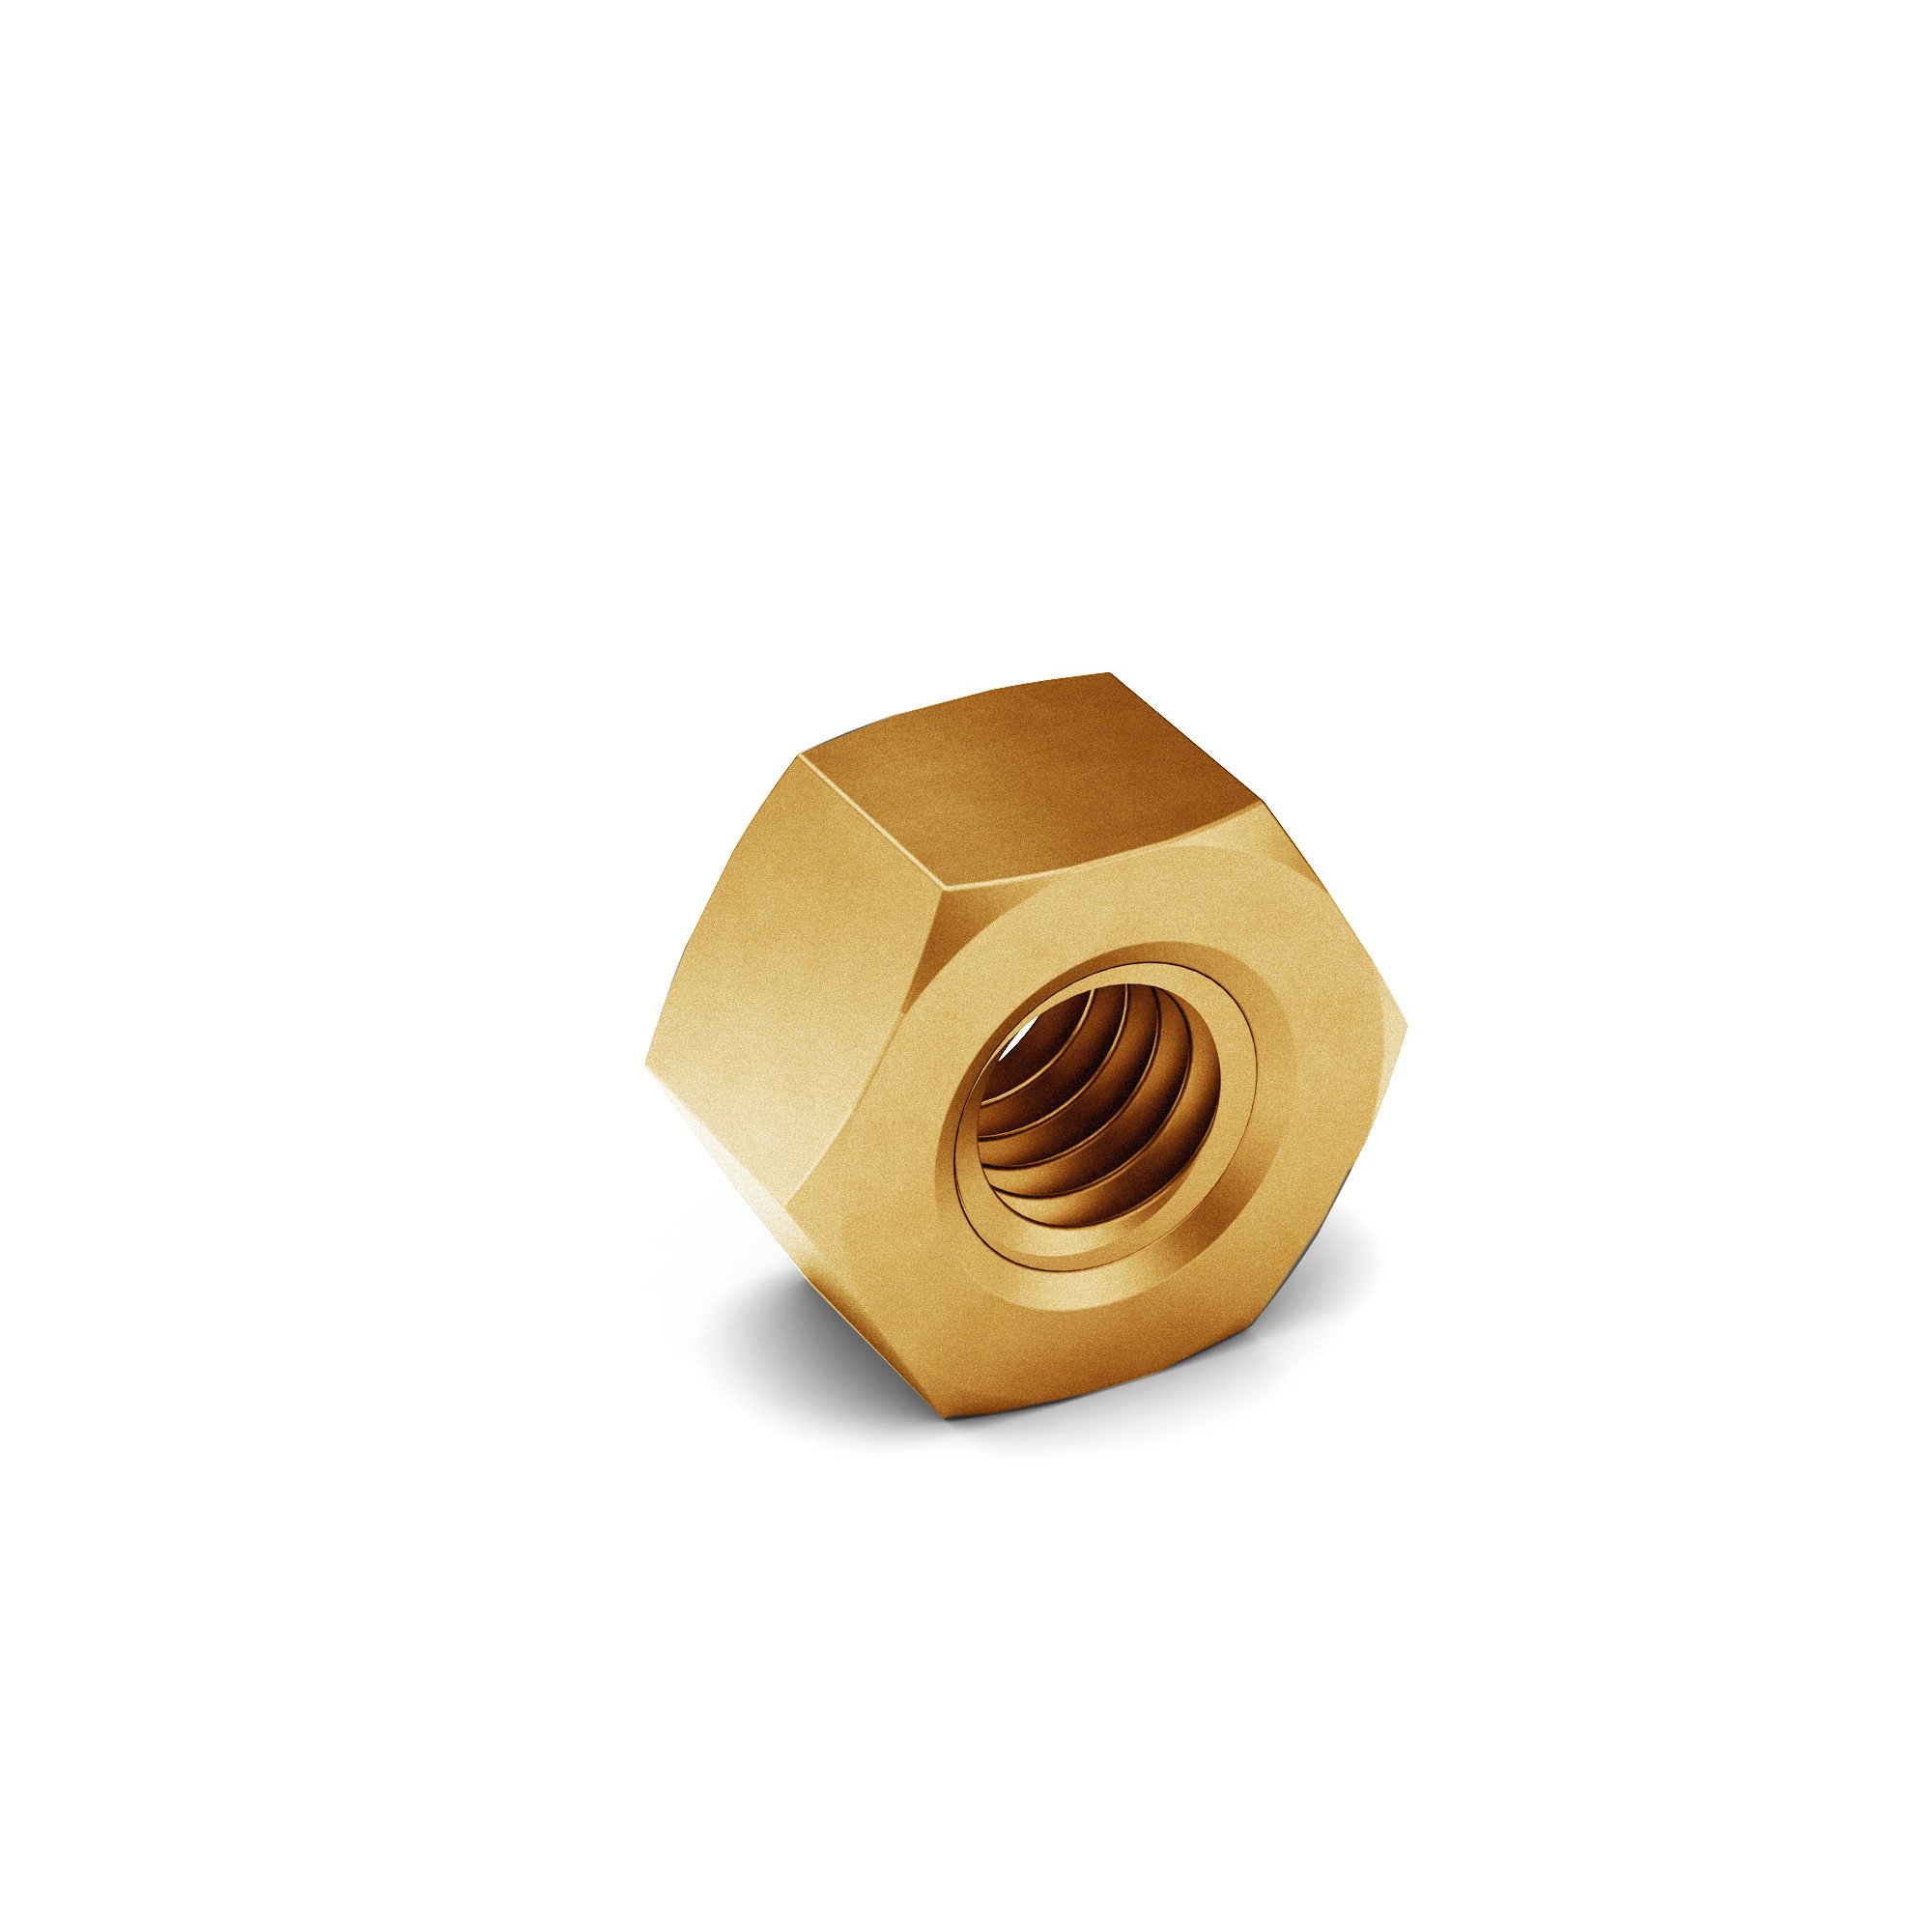 5/8-11 J995 GR 5 Hex Nut ISO 4042 ZINC & YELLOW, 8 Microns, 72hrs White/ 120 Hrs Red (A3C)